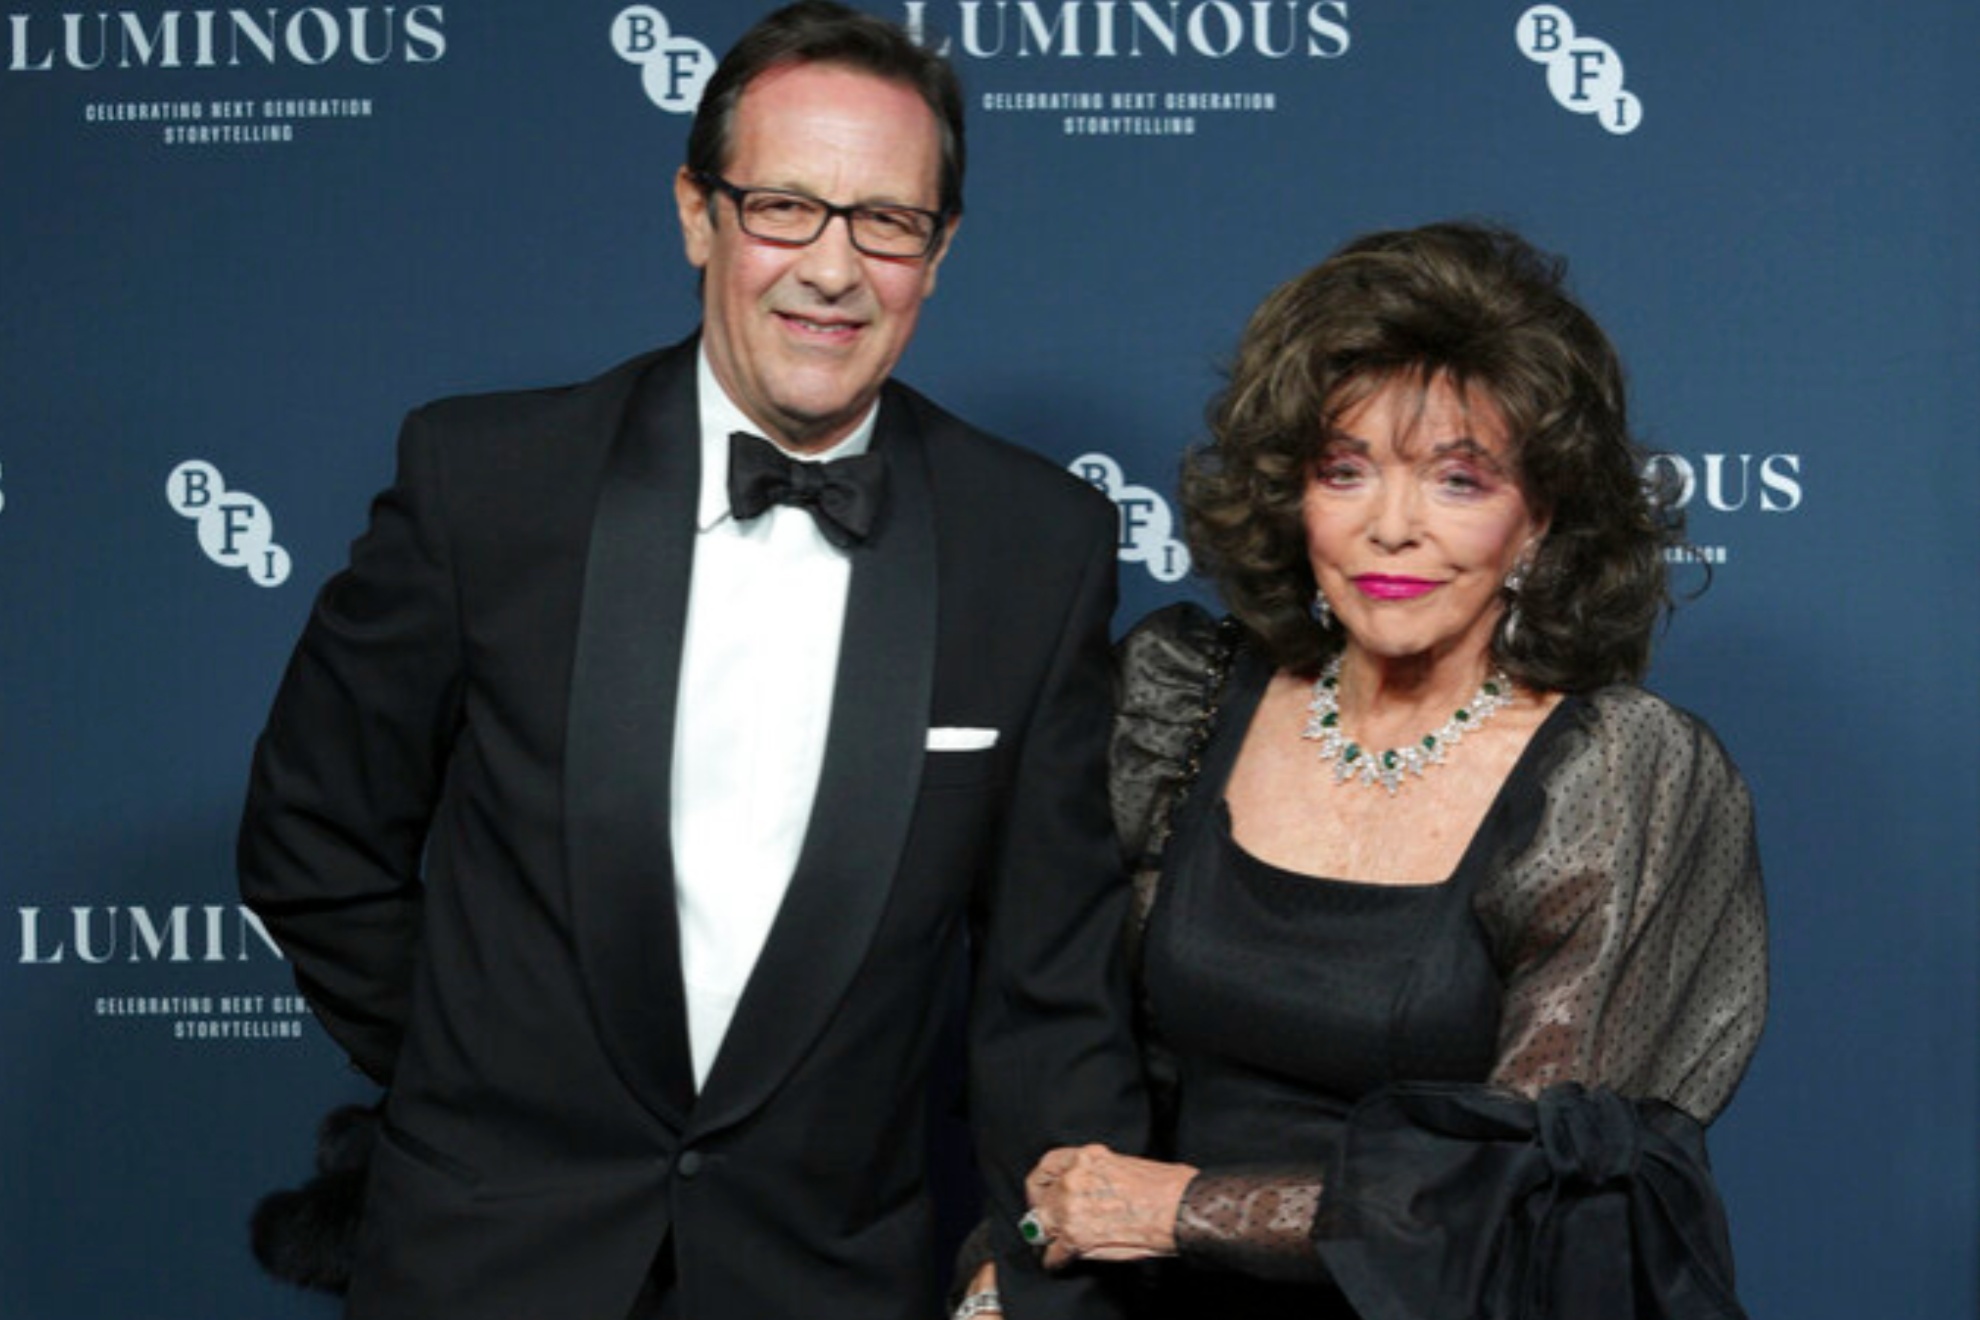 Joan Collins made a public appearance with her husband Percy Gibson in London on Thursday